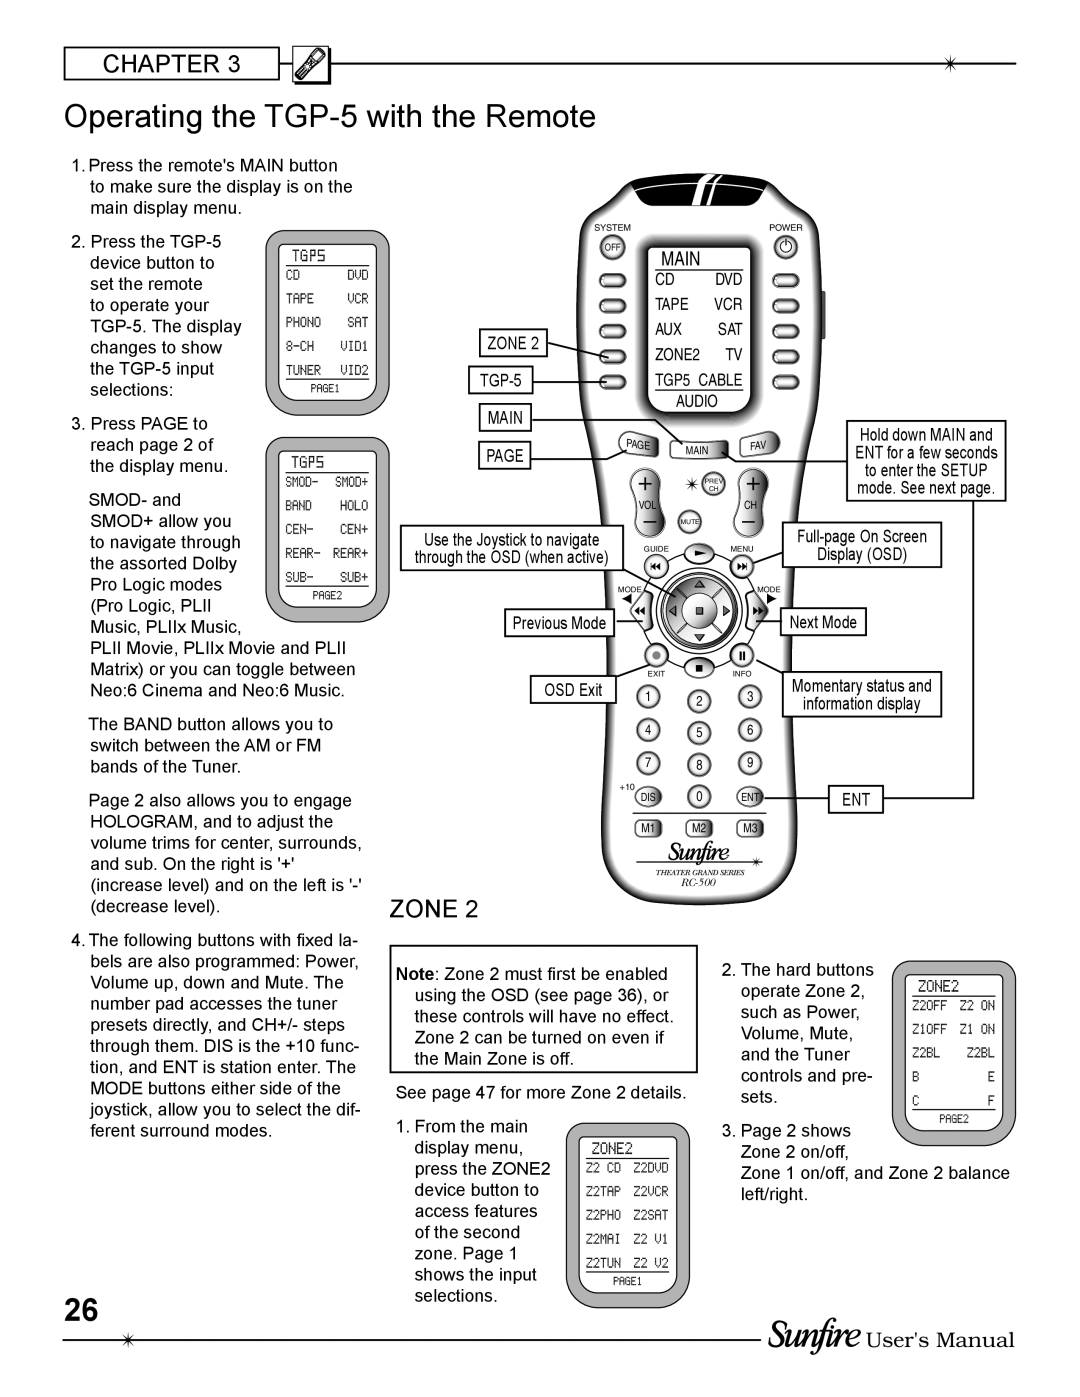 Sunfire TGP-5(E) manual Operating the TGP-5with the Remote, Chapter, Zone, Users Manual, Main 